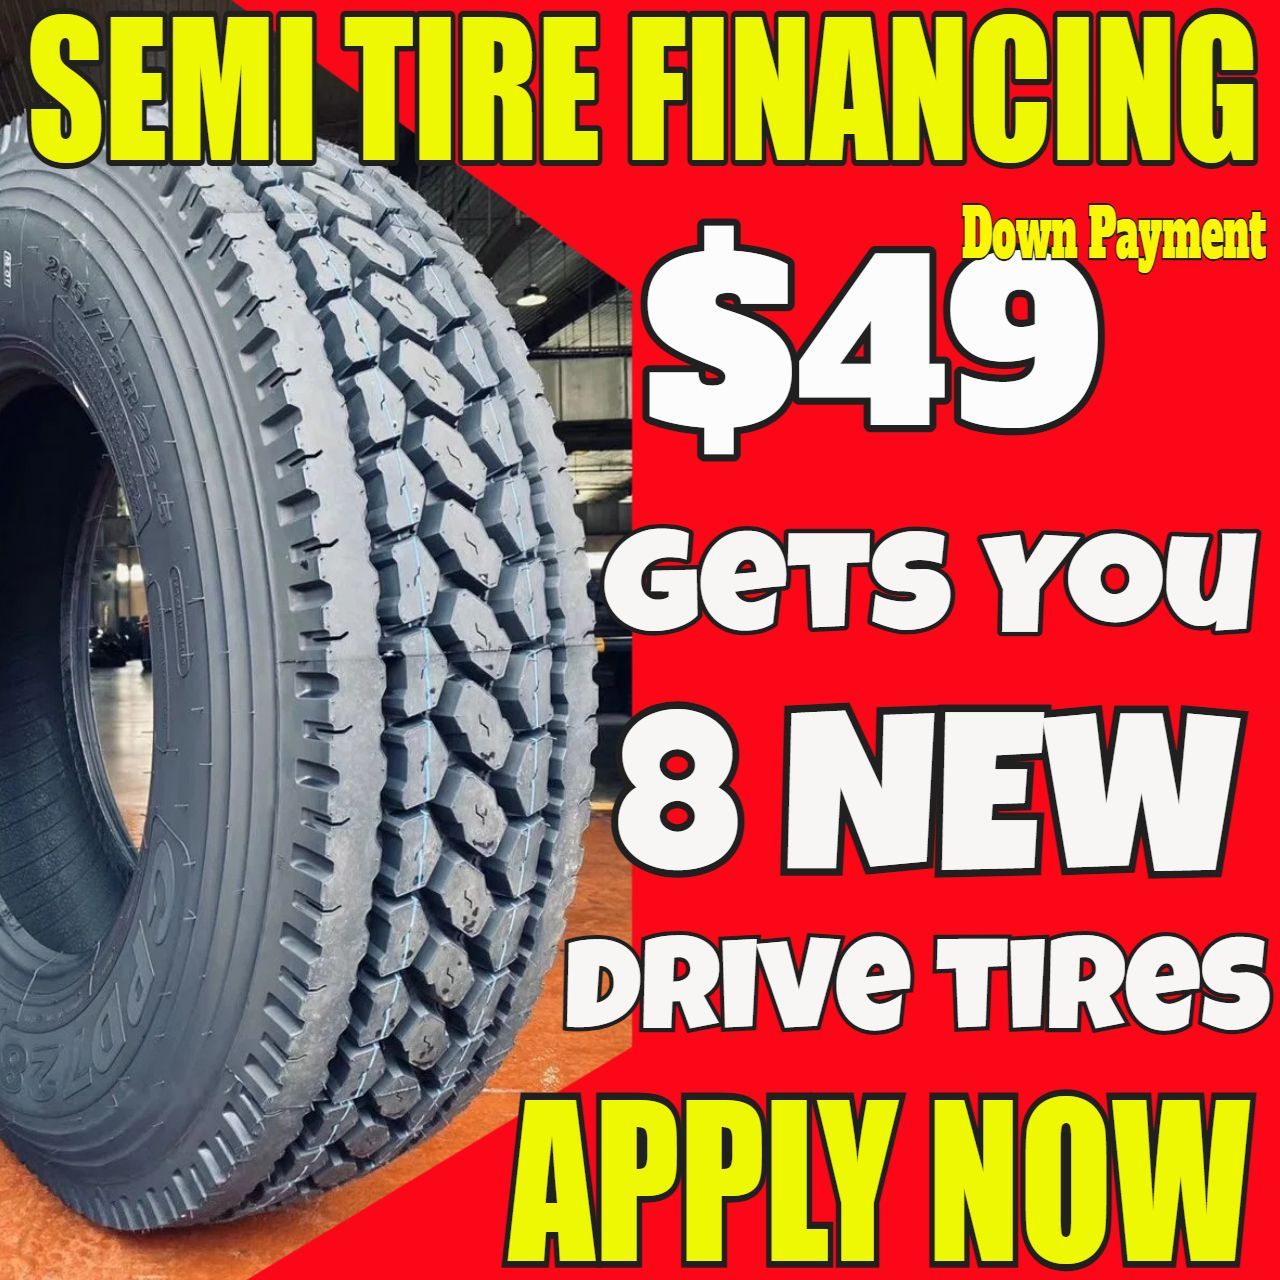 Commercial semi-truck tires Gulfport, MS. 18-wheeler Heavy-duty Big-Rig trucking tires at cheap tractor-trailer auto prices. Tupelo, MS - Olive Branch, MS - Meridian, MS